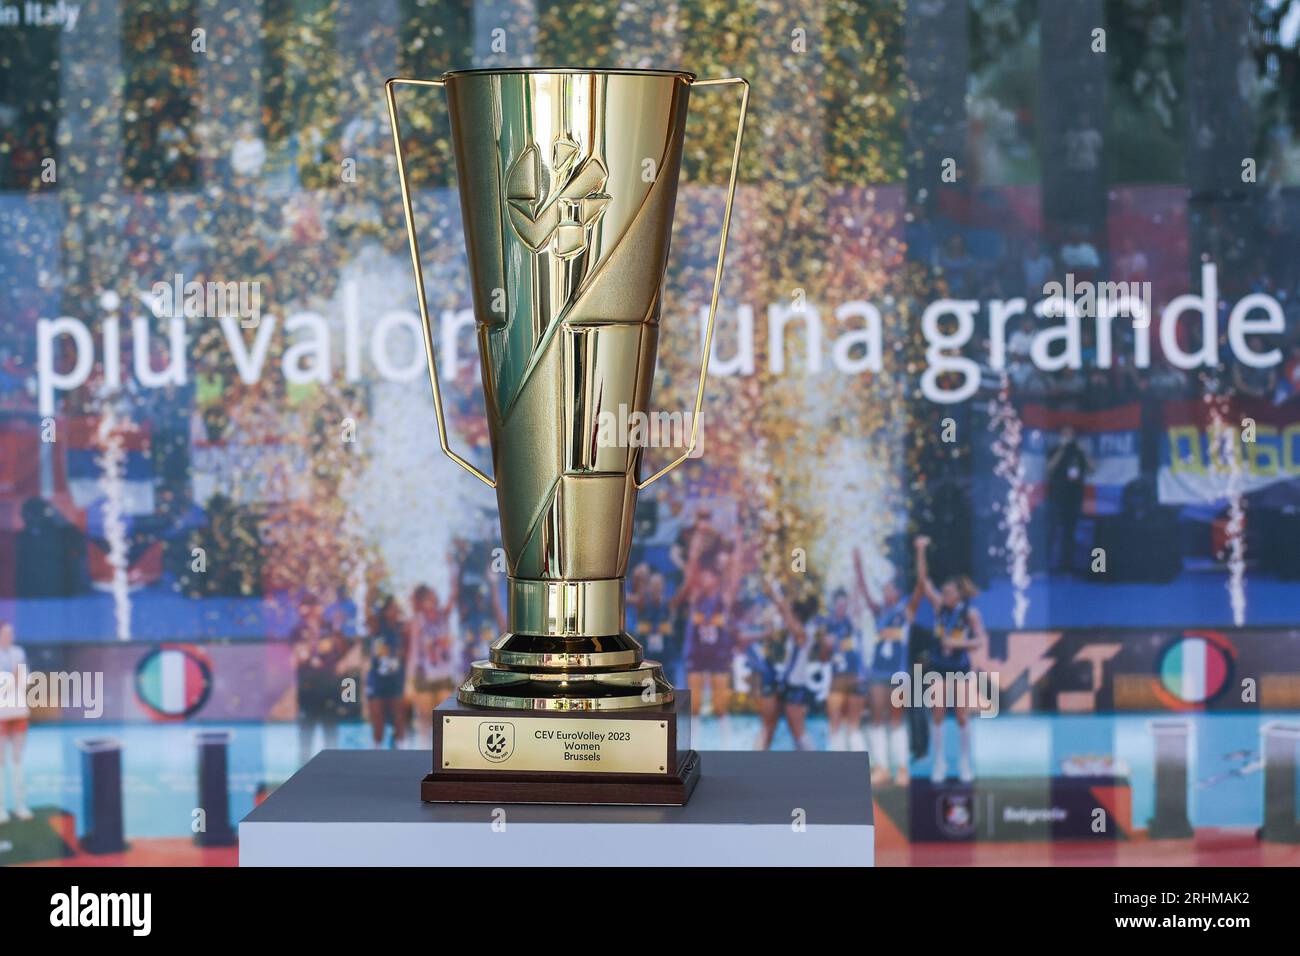 Monza, Italy. 17th Aug, 2023. CEV EuroVolley Women 2023 Trophy seen during the Final Round Pool B volleyball match between Bosnia-Herzegovina and Bulgaria at Arena di Monza. Final Score; Bosnia ed Erzegovina-Bulgaria 1-3 (20-25, 19-25, 25-19, 18-25) (Photo by Fabrizio Carabelli/SOPA Images/Sipa USA) Credit: Sipa USA/Alamy Live News Stock Photo